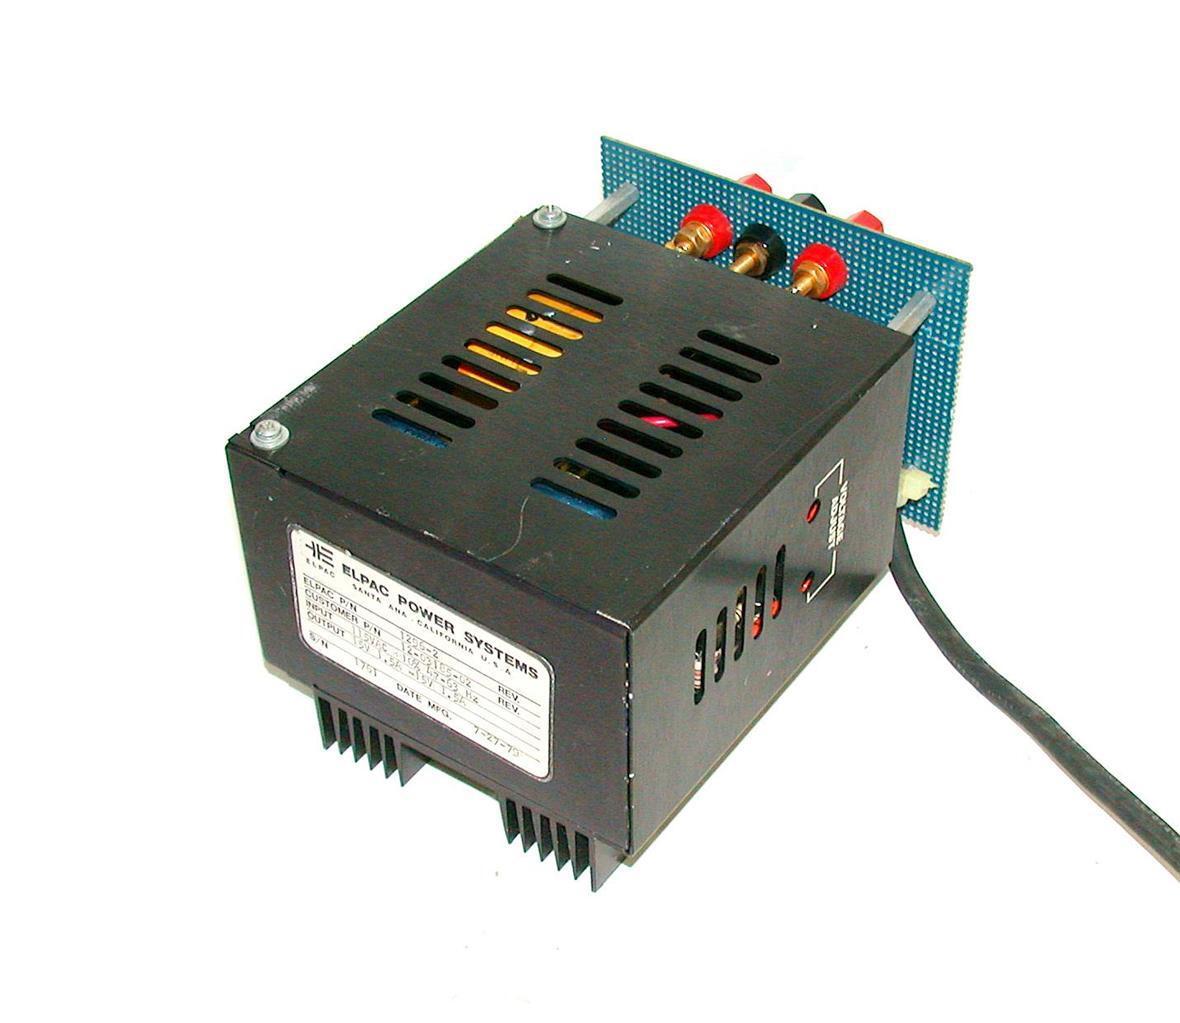 ELPAC POWER SYSTEMS POWER SUPPLY 15 VDC MODEL 1296-2